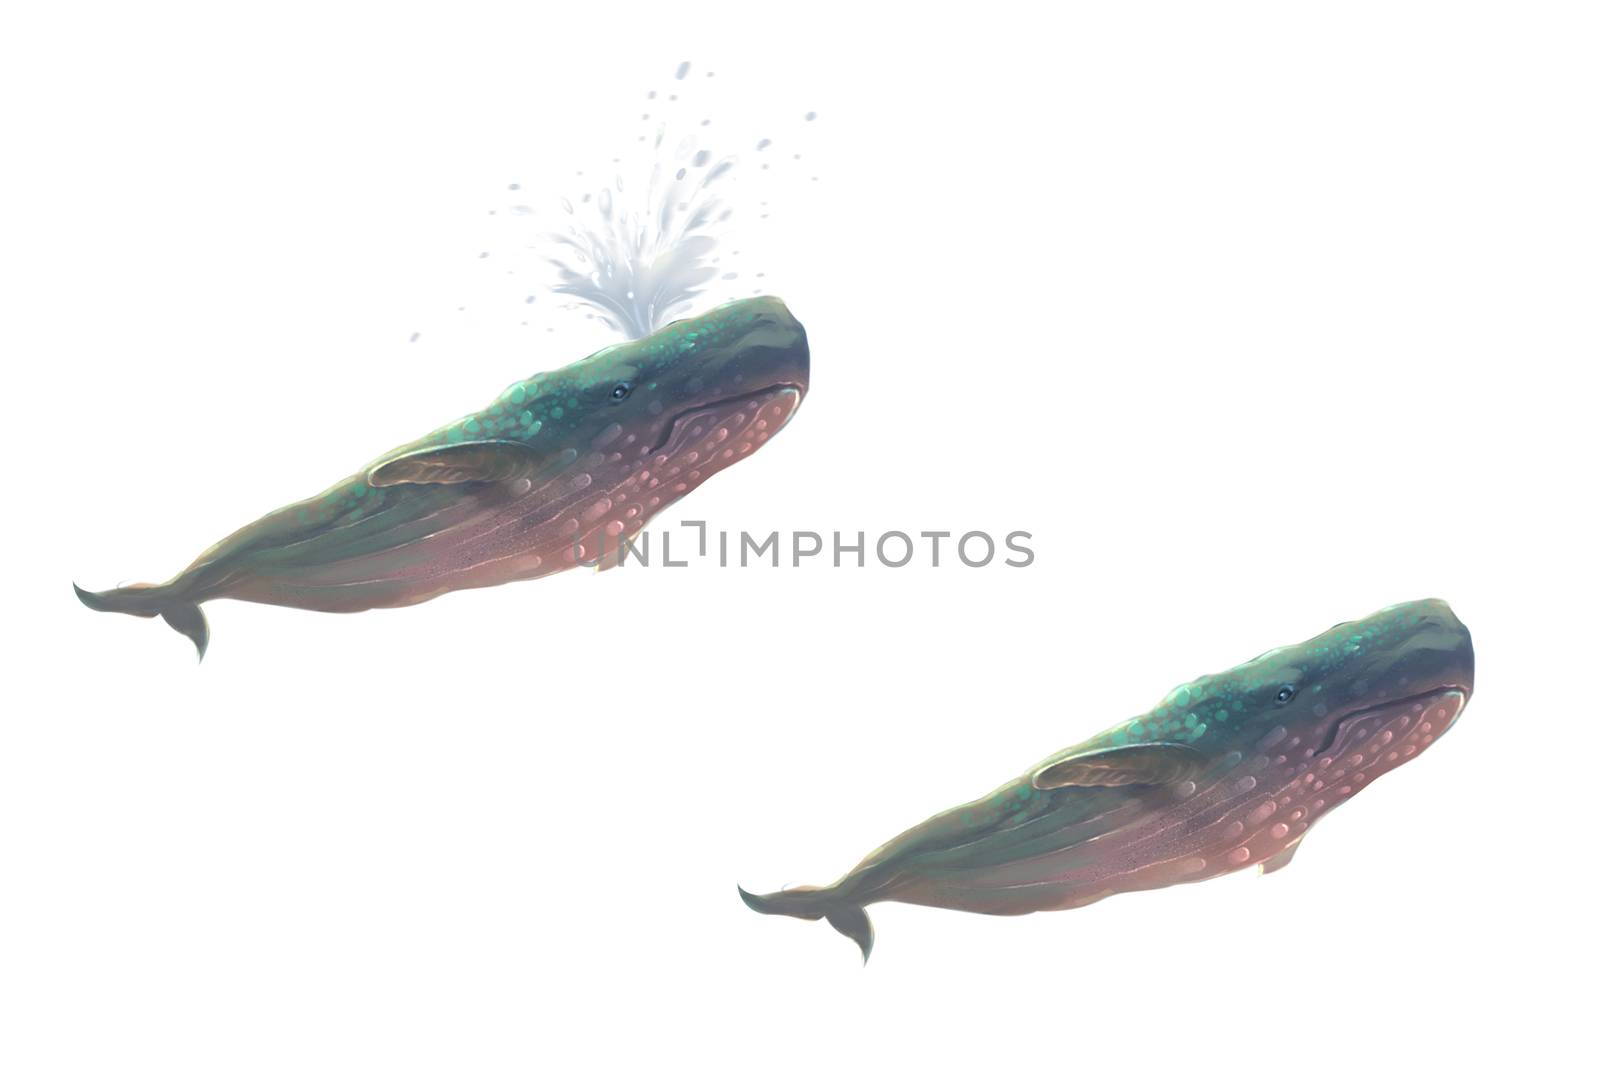 Illustration: Illustration: The Great Whale Flying in the Sky. Put it in a white background in case you need it. Fantastic / Realistic / Cartoon Style. Wallpaper / Background / Scene Design